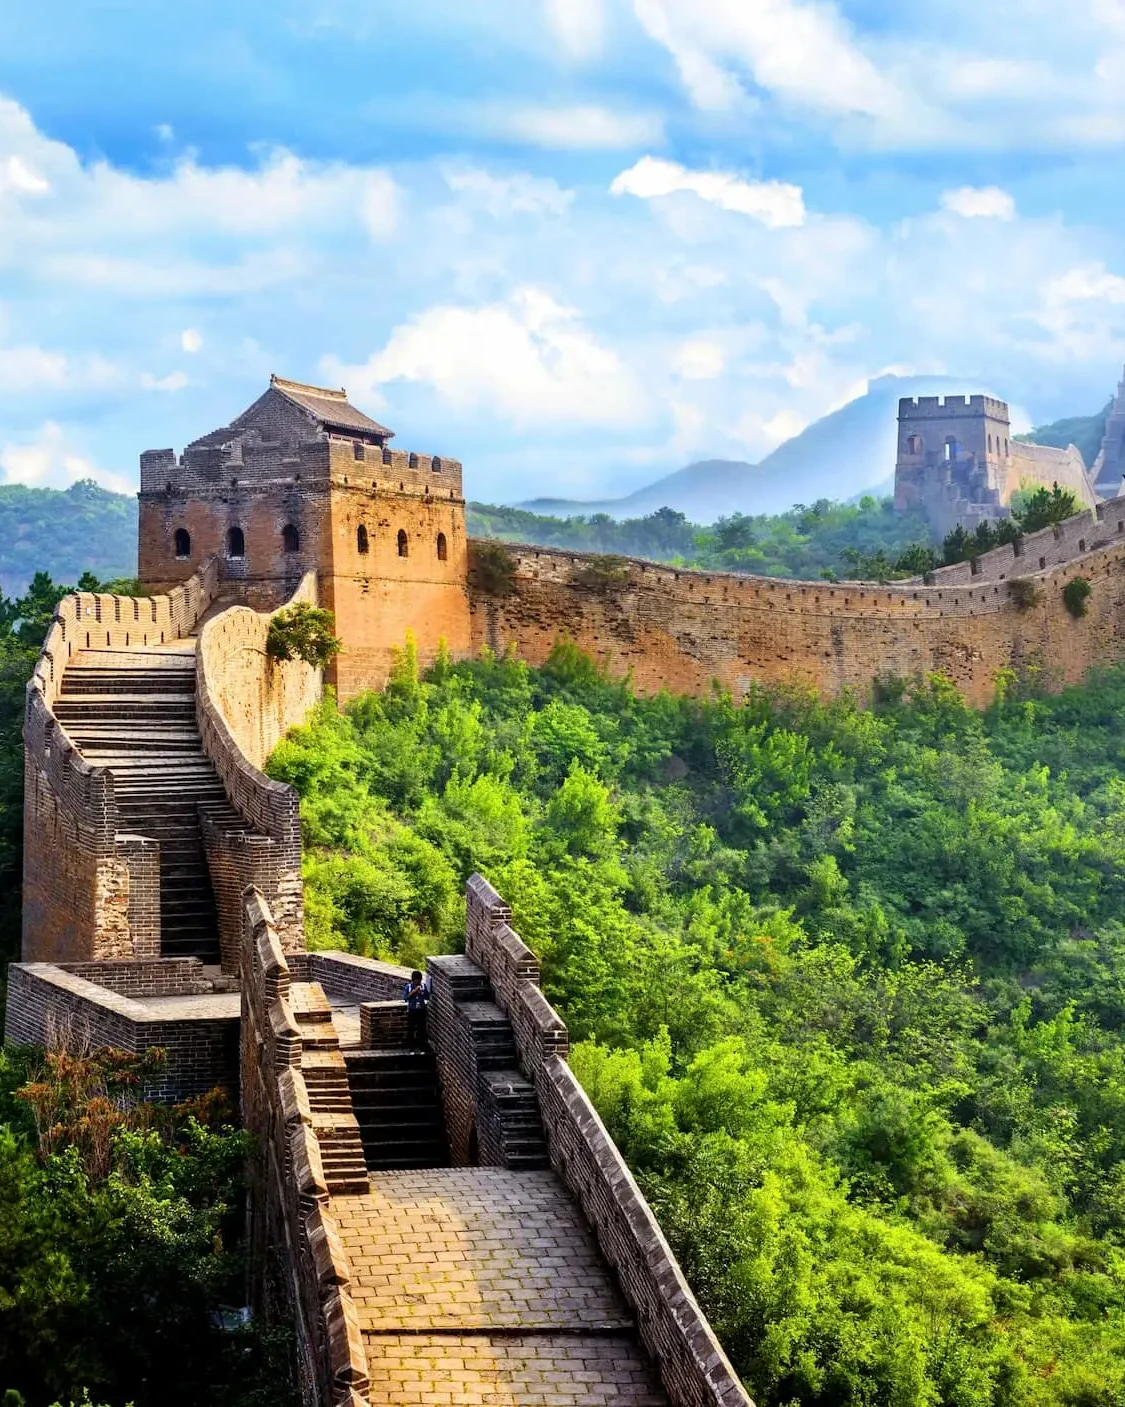 A painting of the great wall of china